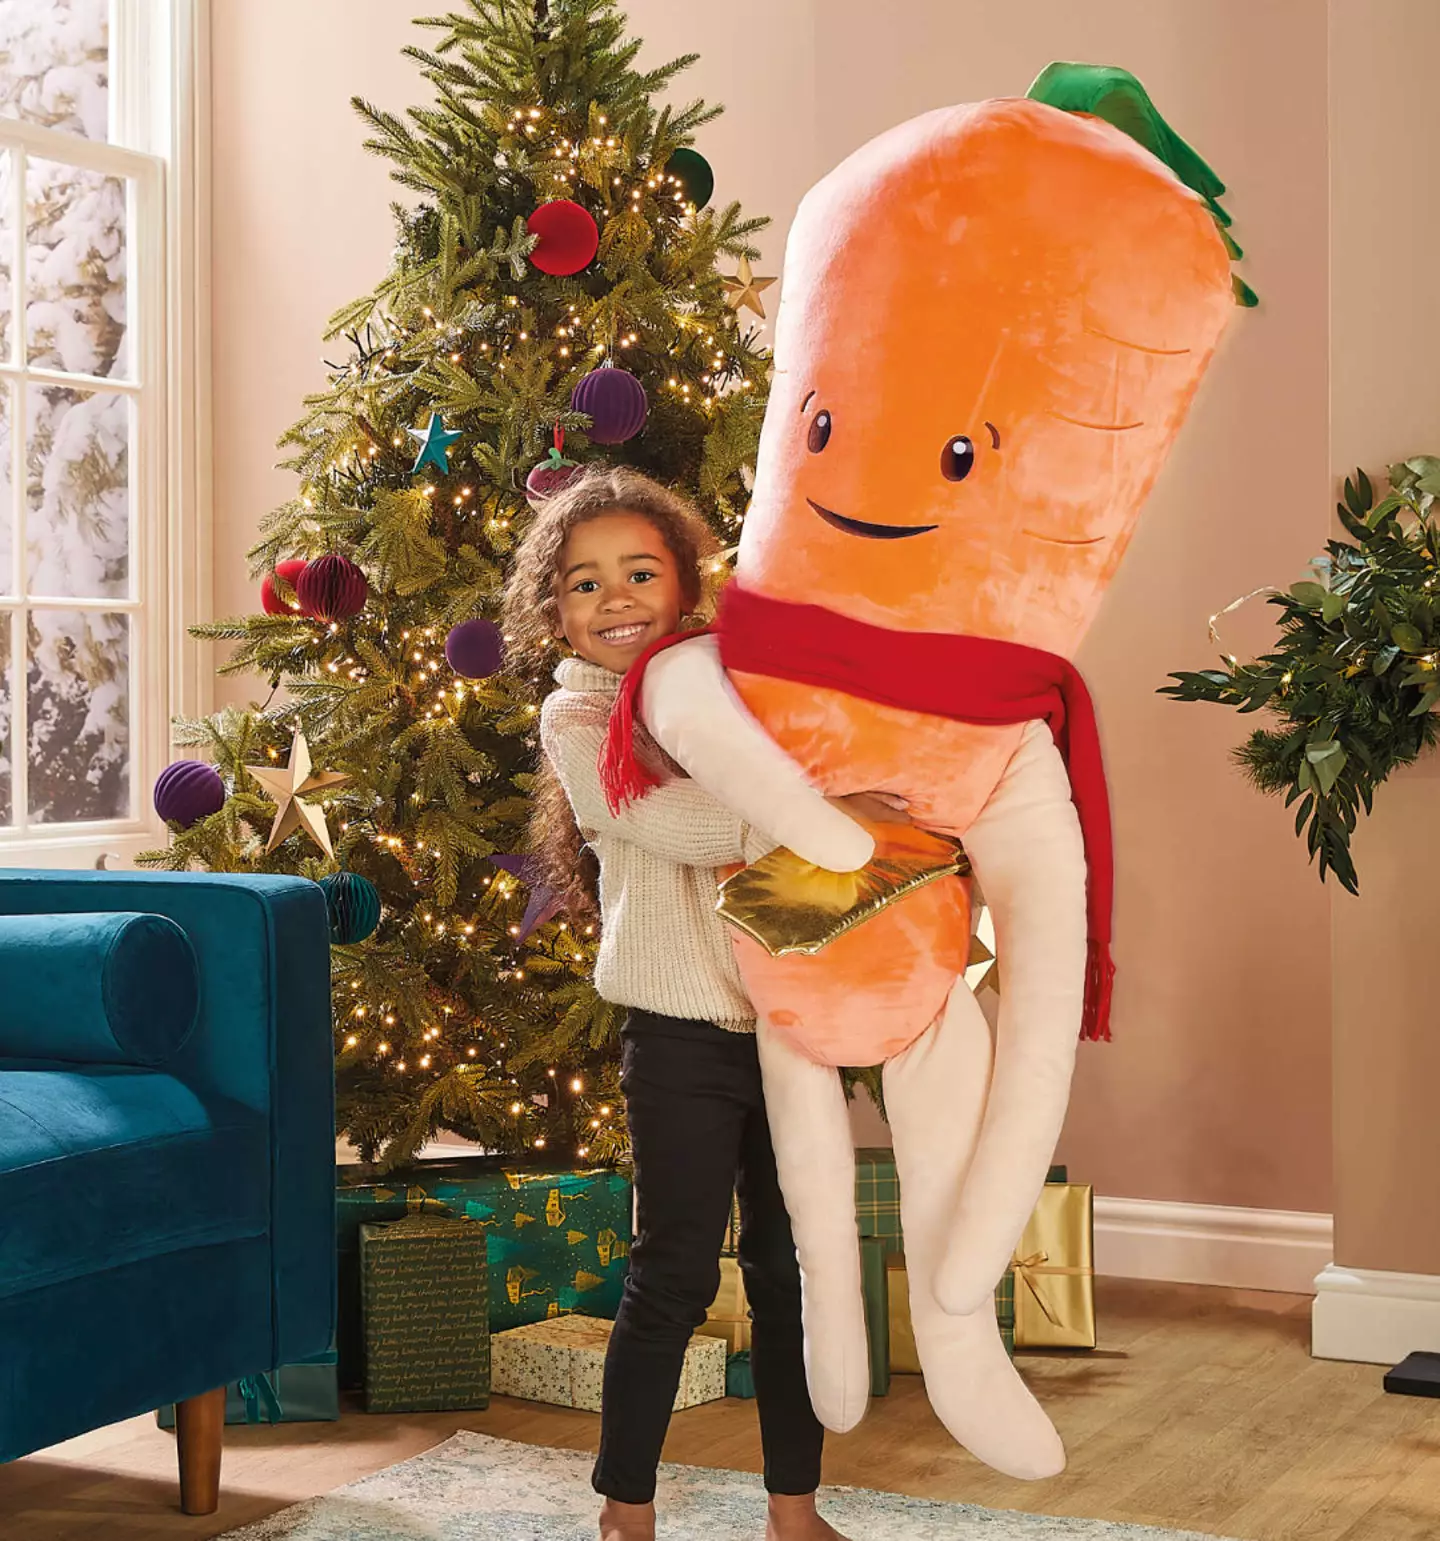 Jumbo Kevin the Carrot soft toys are retailing for £19.99.